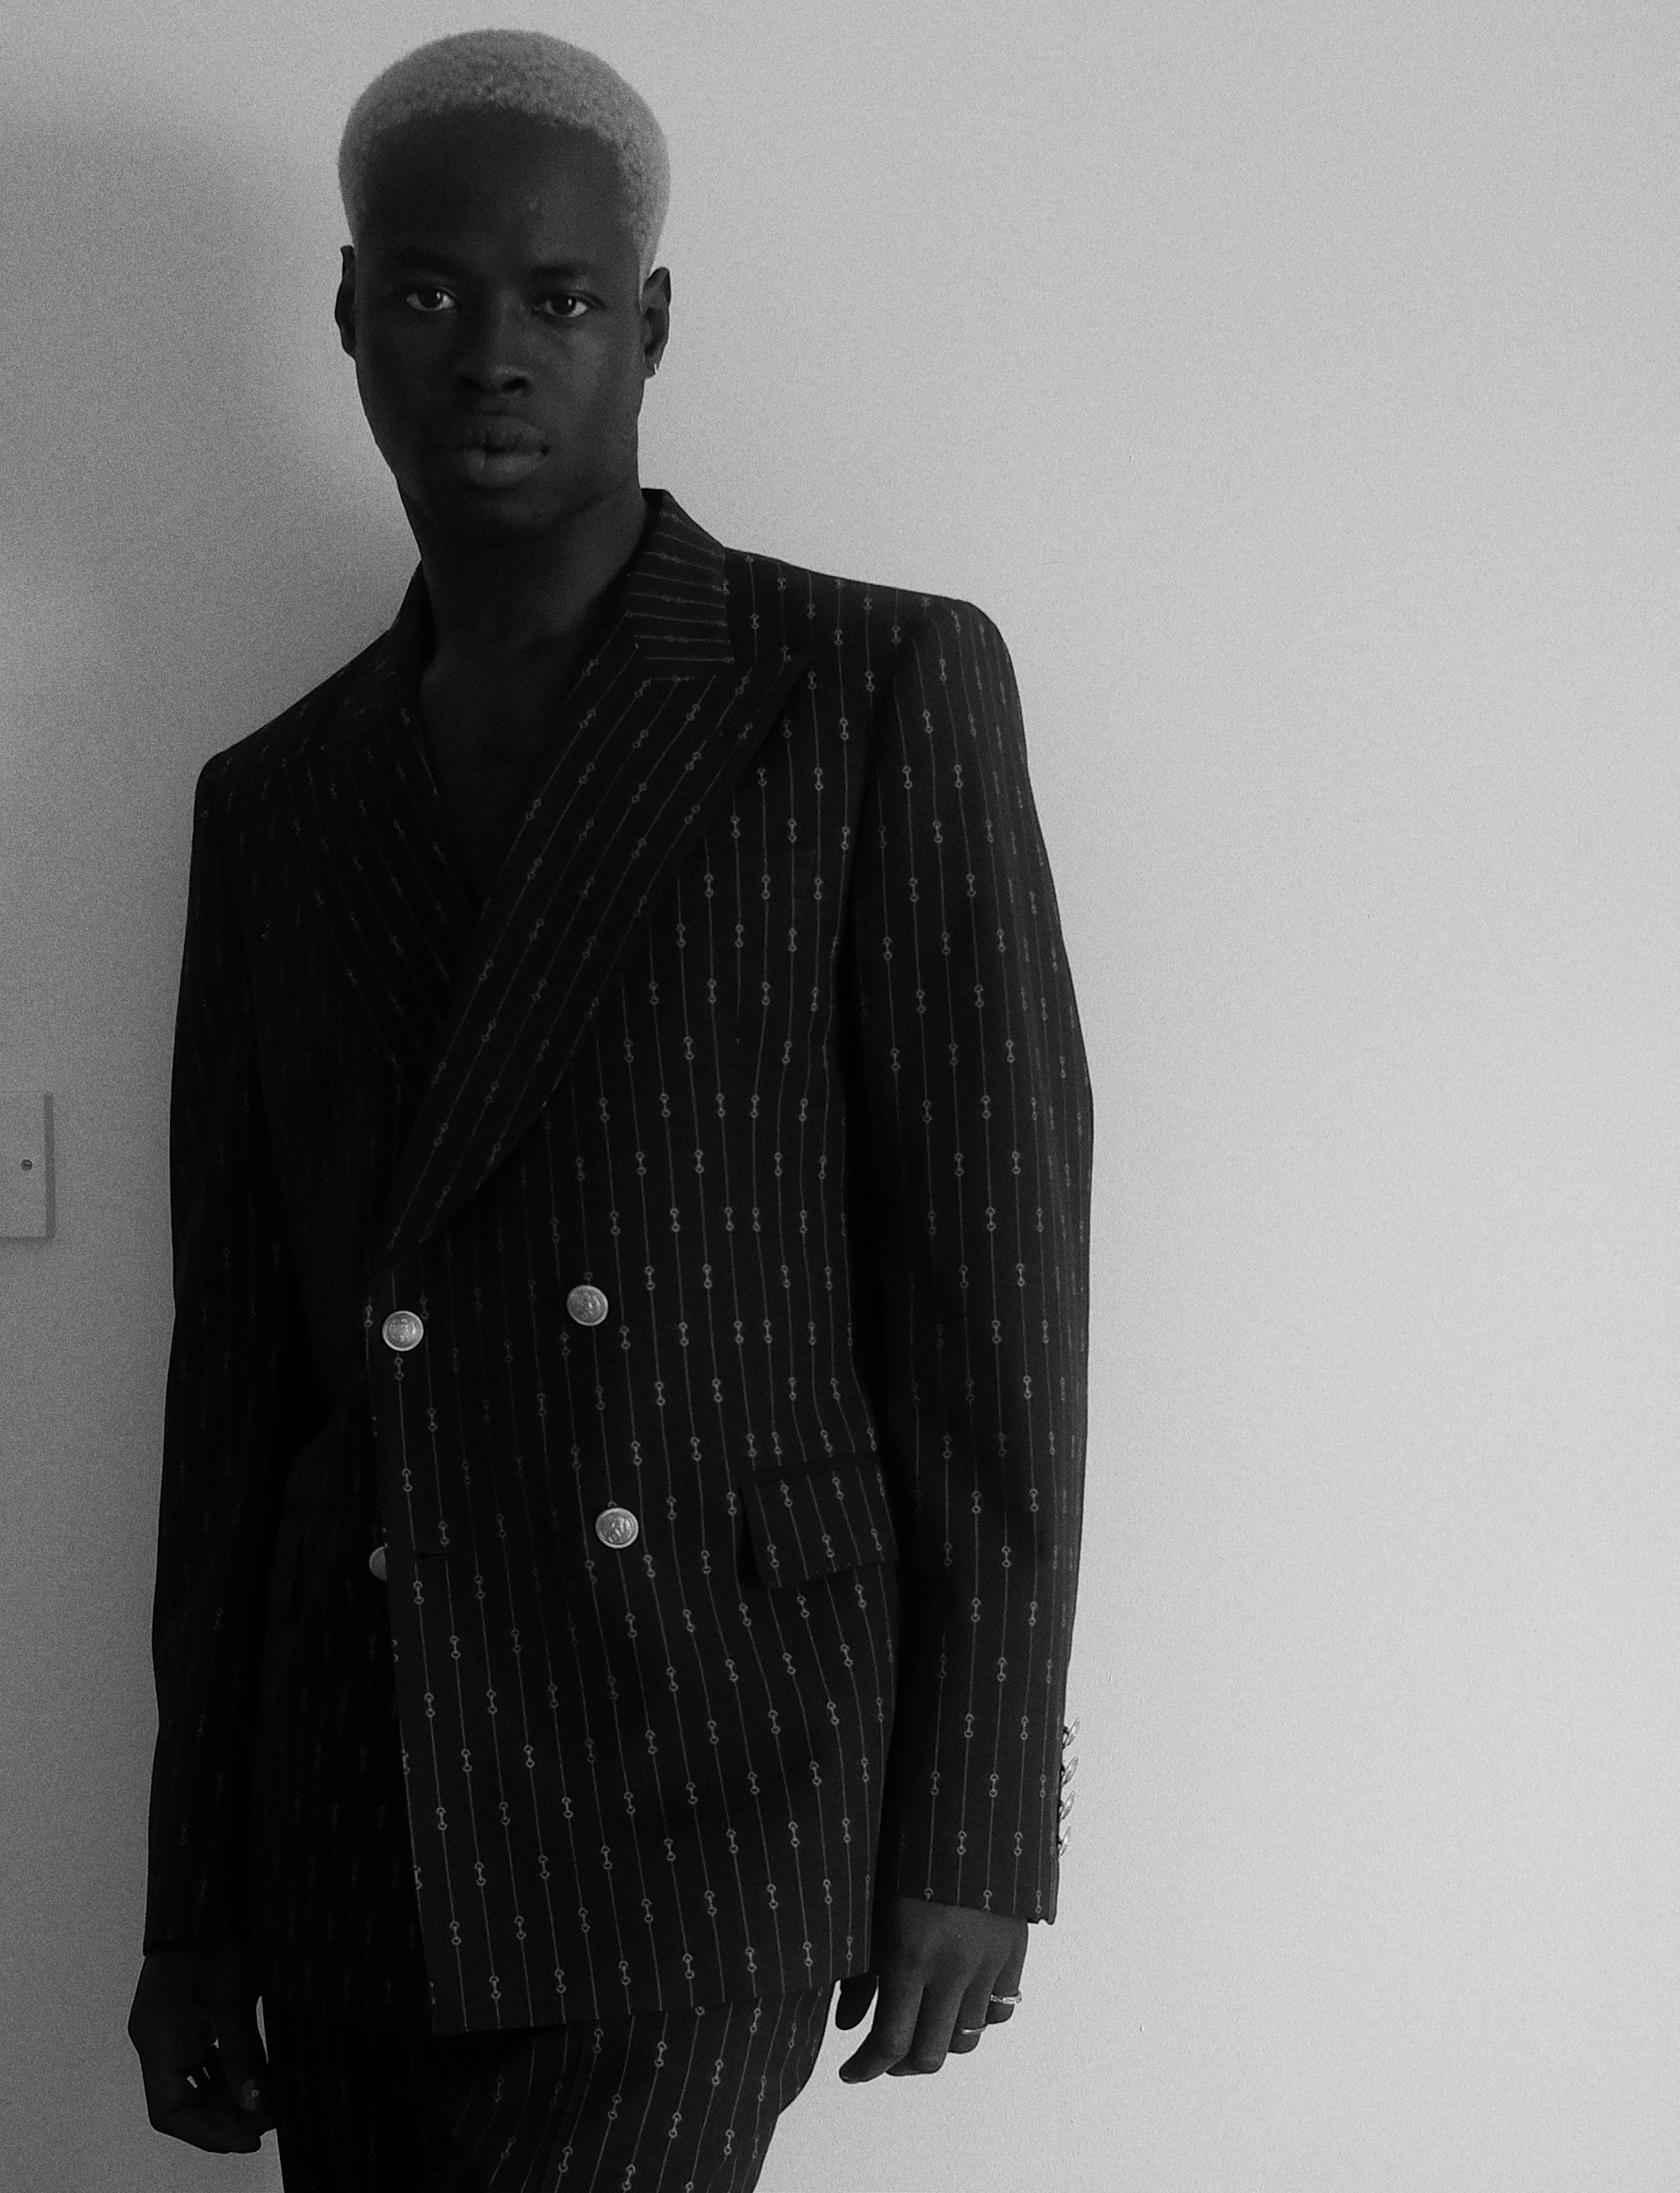 ‘How do you feel in your Gucci suit?’ - © Photographed by Ib Kamara, System Magazine